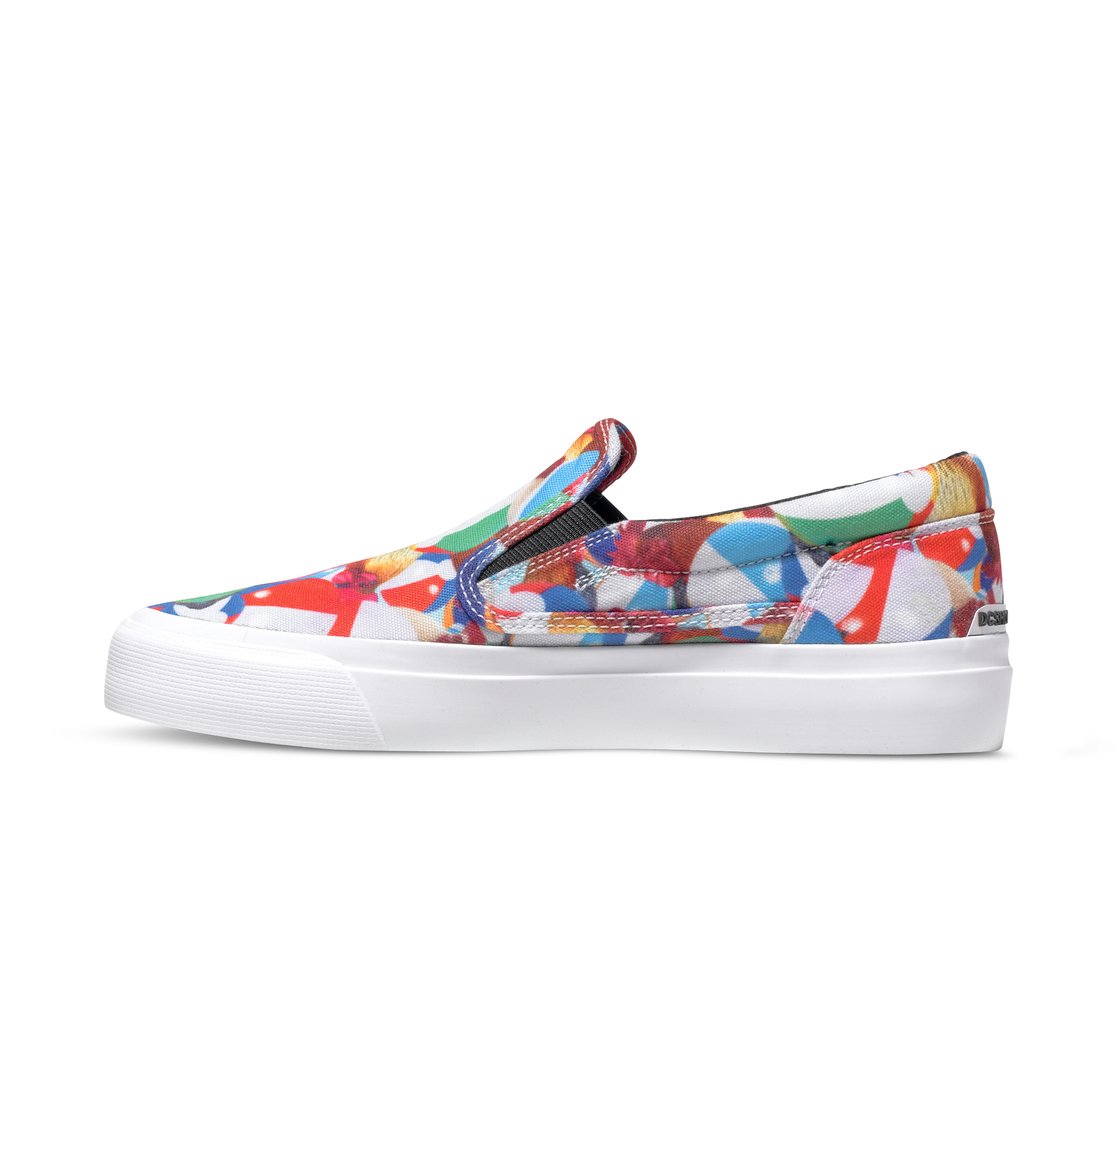 Women's Trase Slip-On SP Shoes 888327188997 | DC Shoes